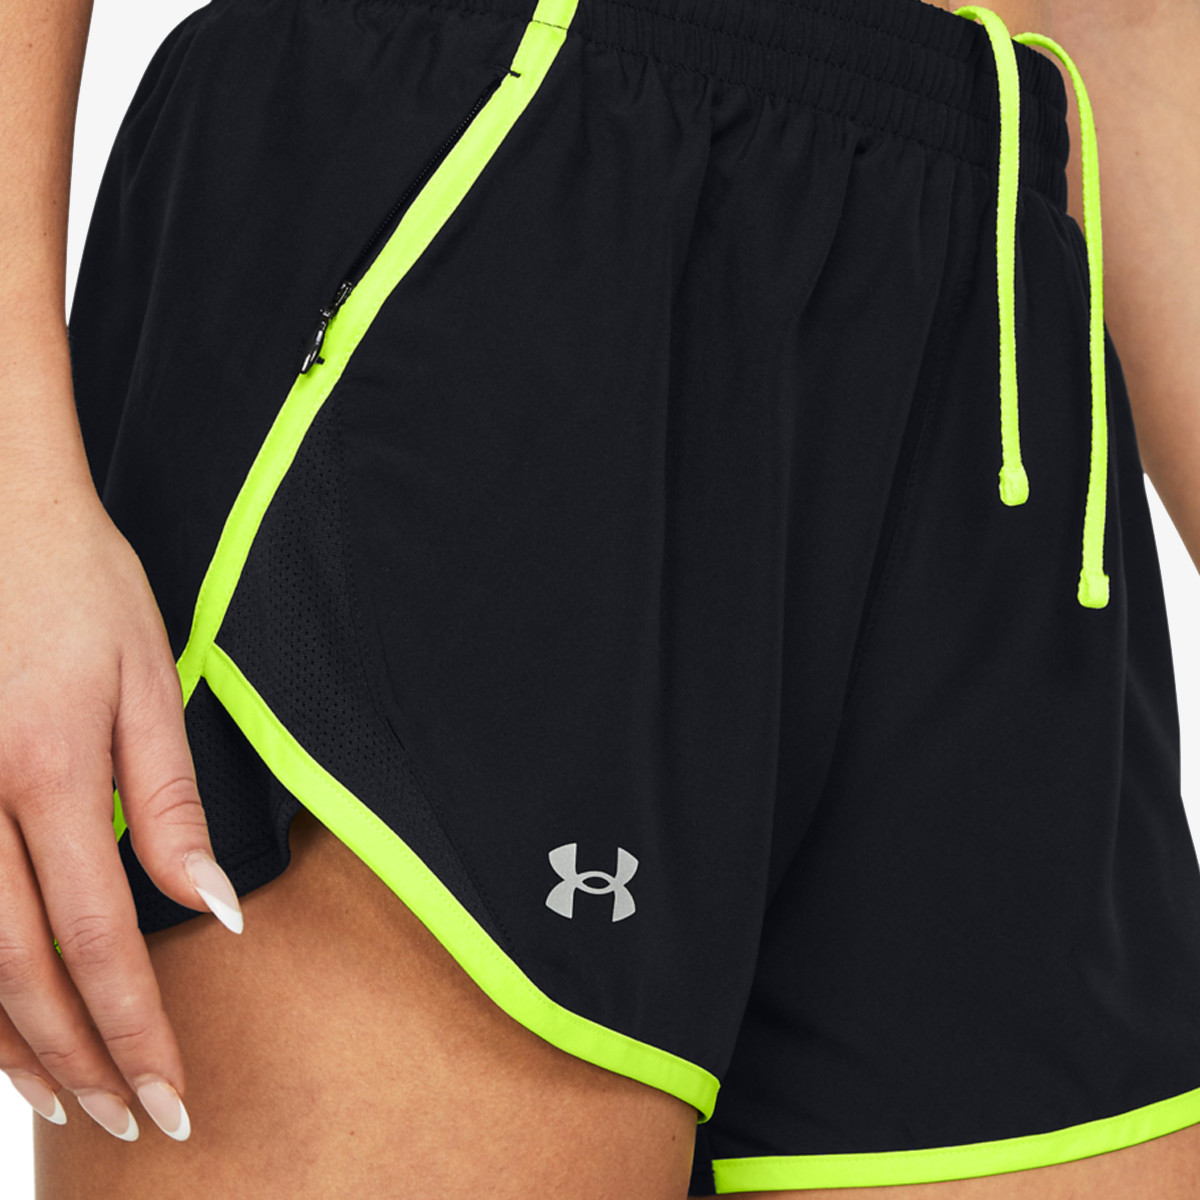 UA Fly By Short 